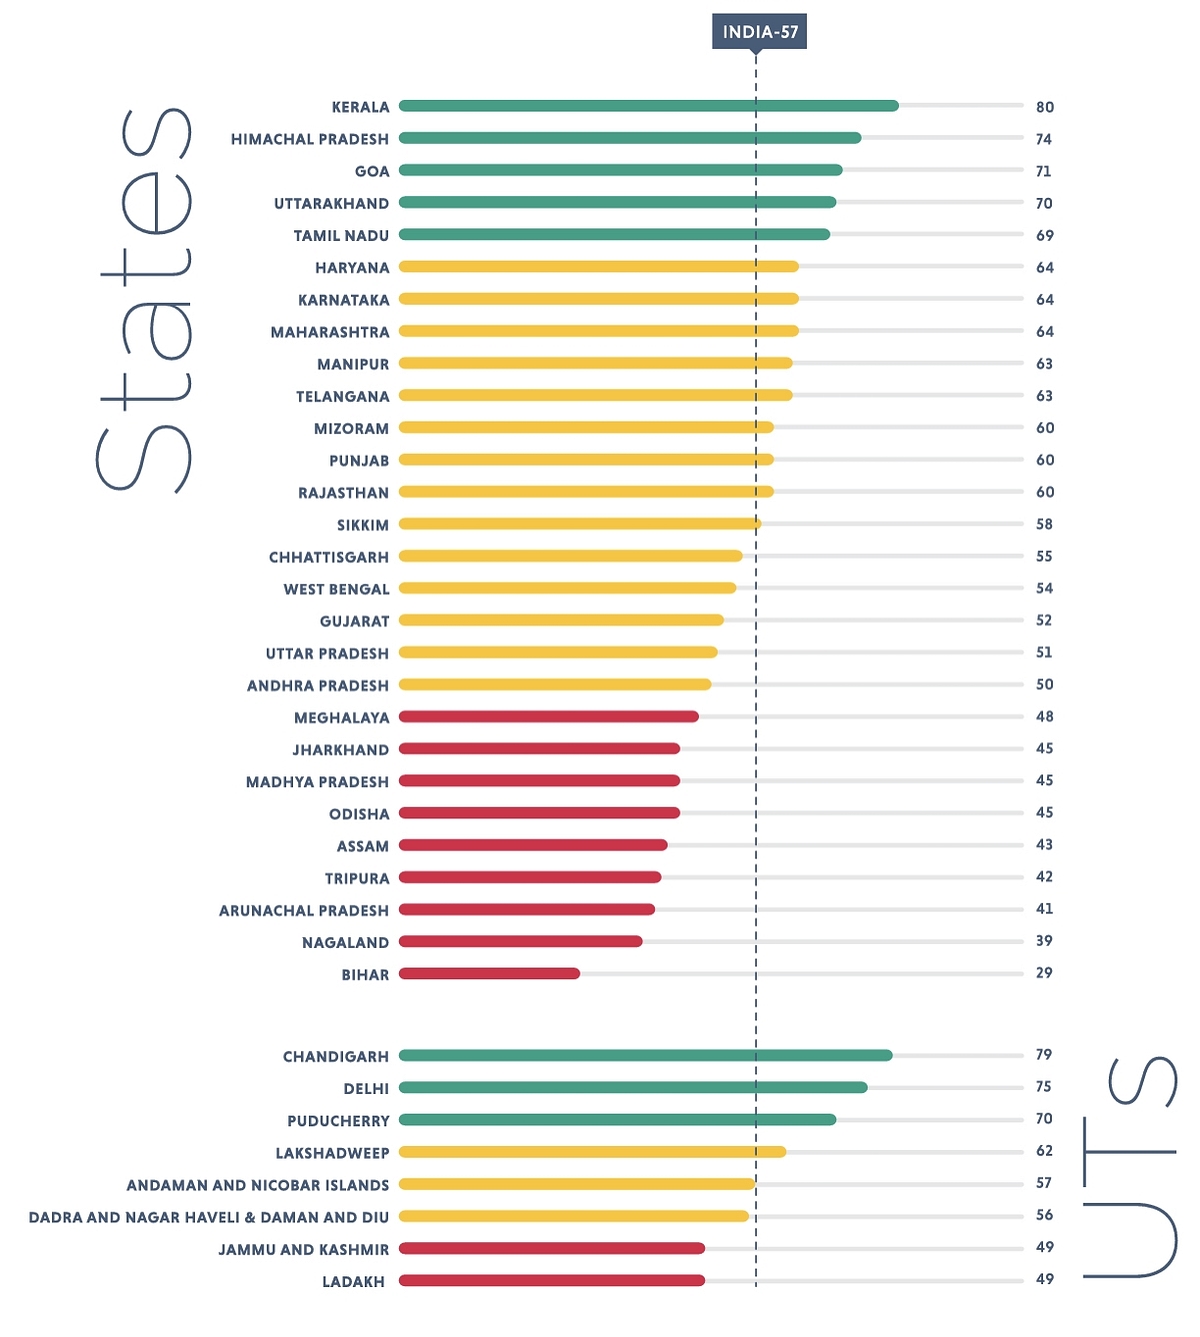 SDG 4 ‘Quality Education’ Index score for States/UTs.